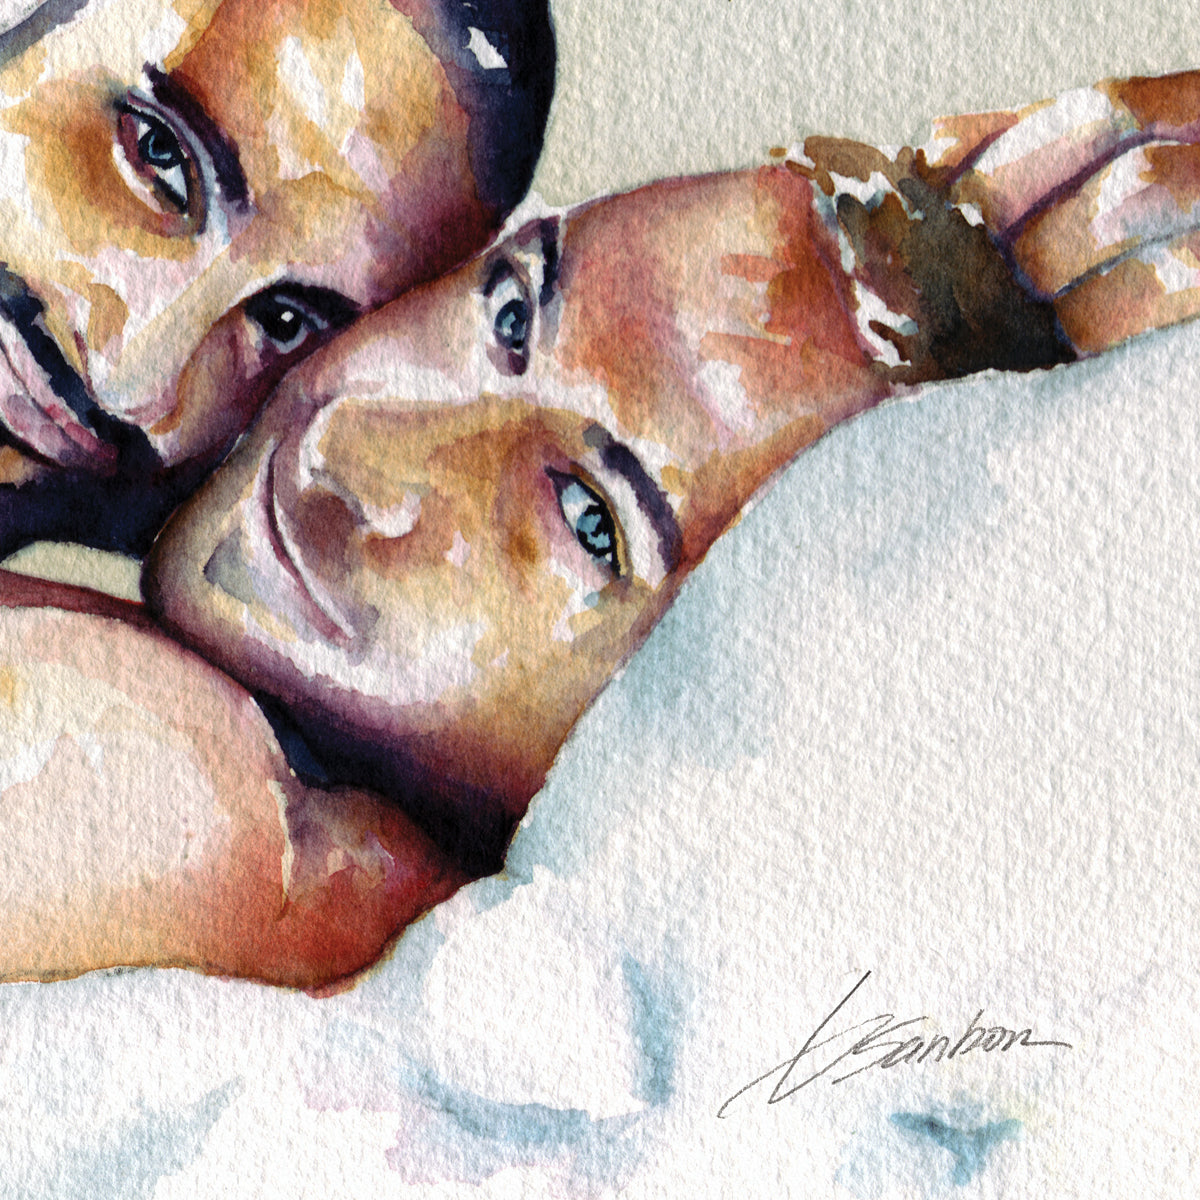 Gay Men Embrace: Sensual Intimacy & Tender Connection - Giclee Art Print